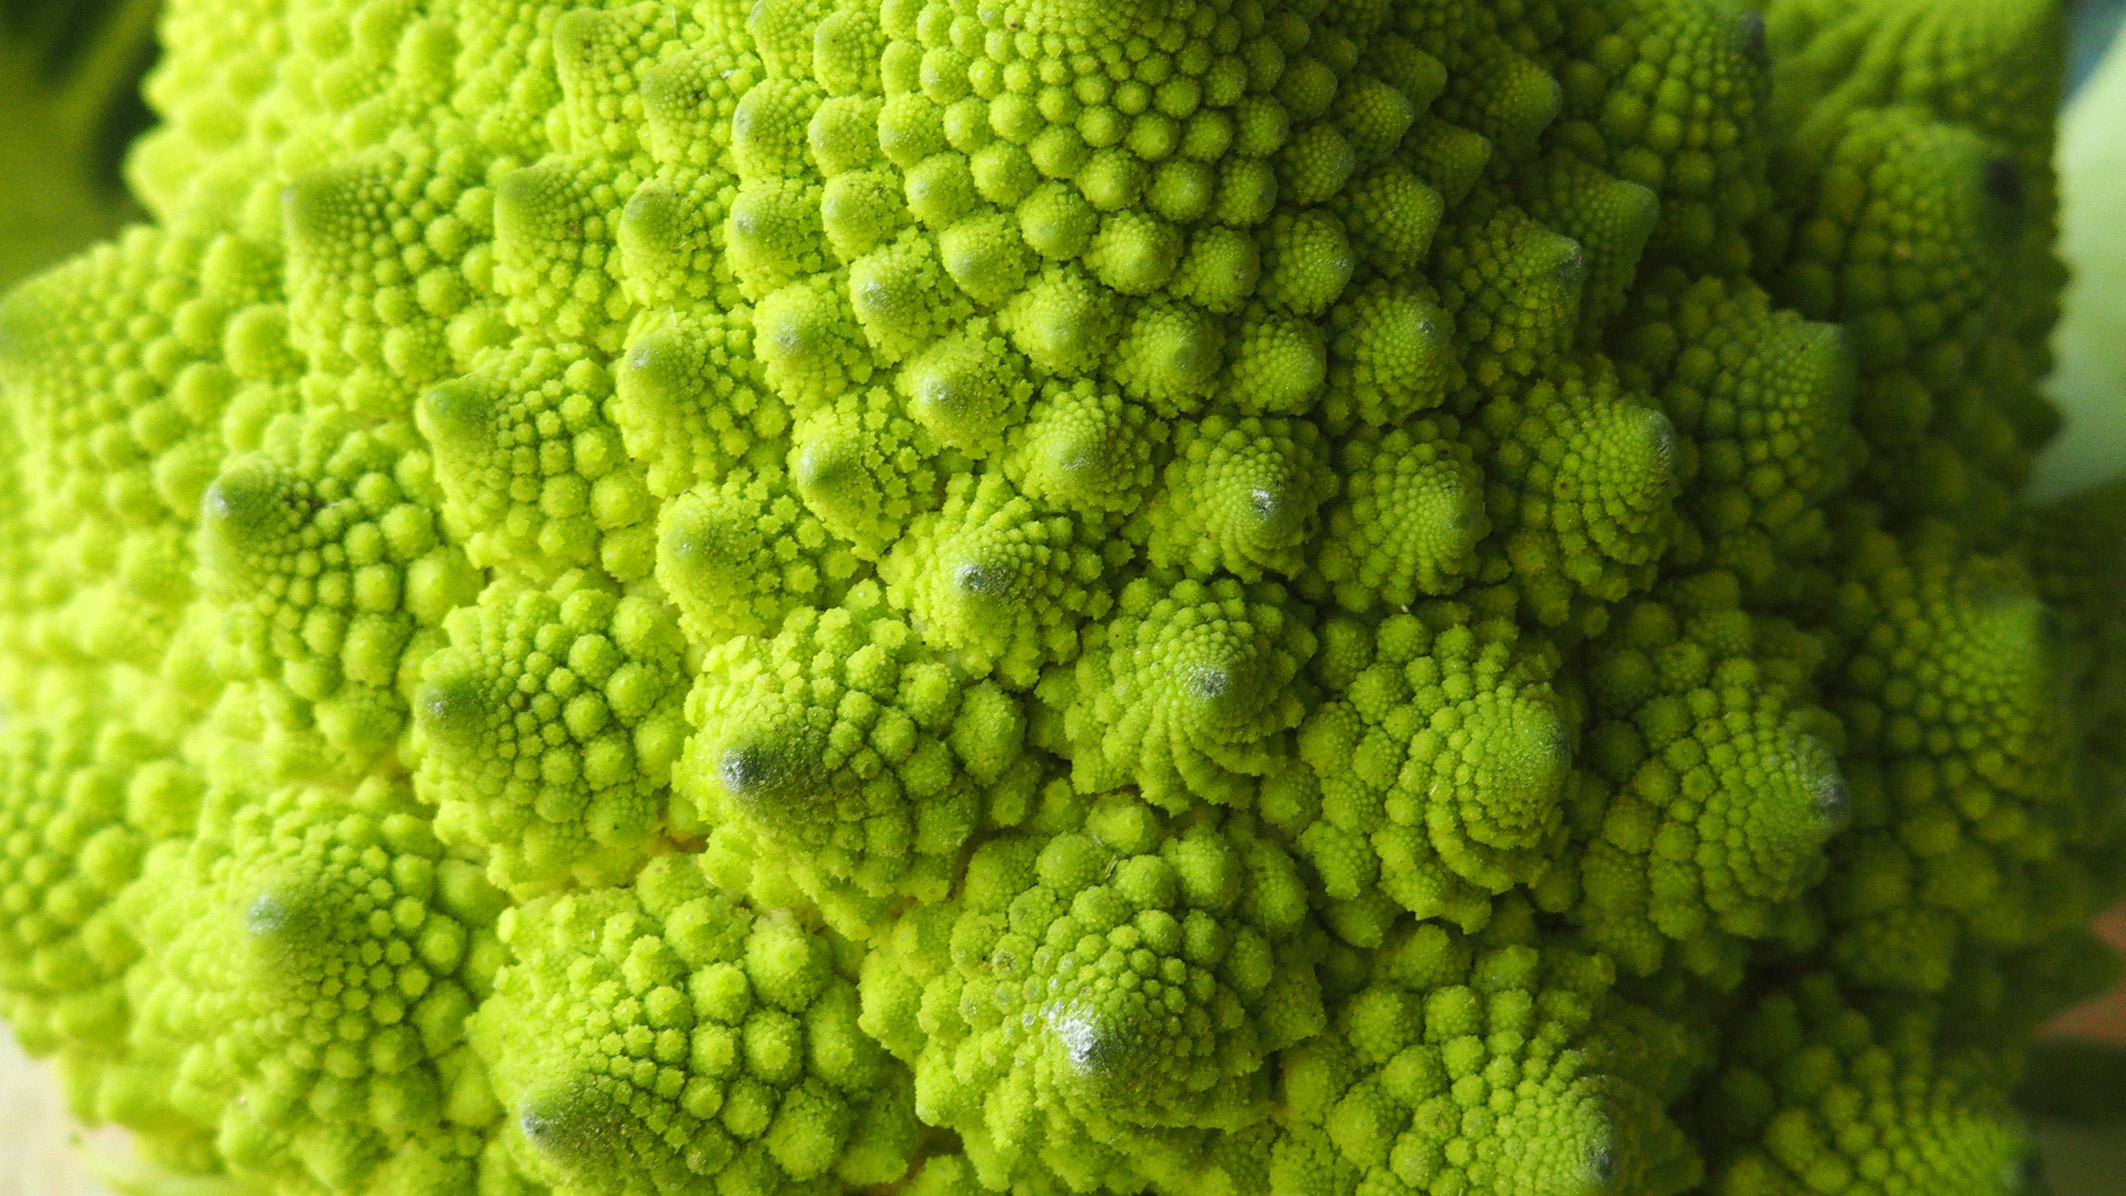 By the Age of 3, Children Appreciate Nature’s Fractal Patterns